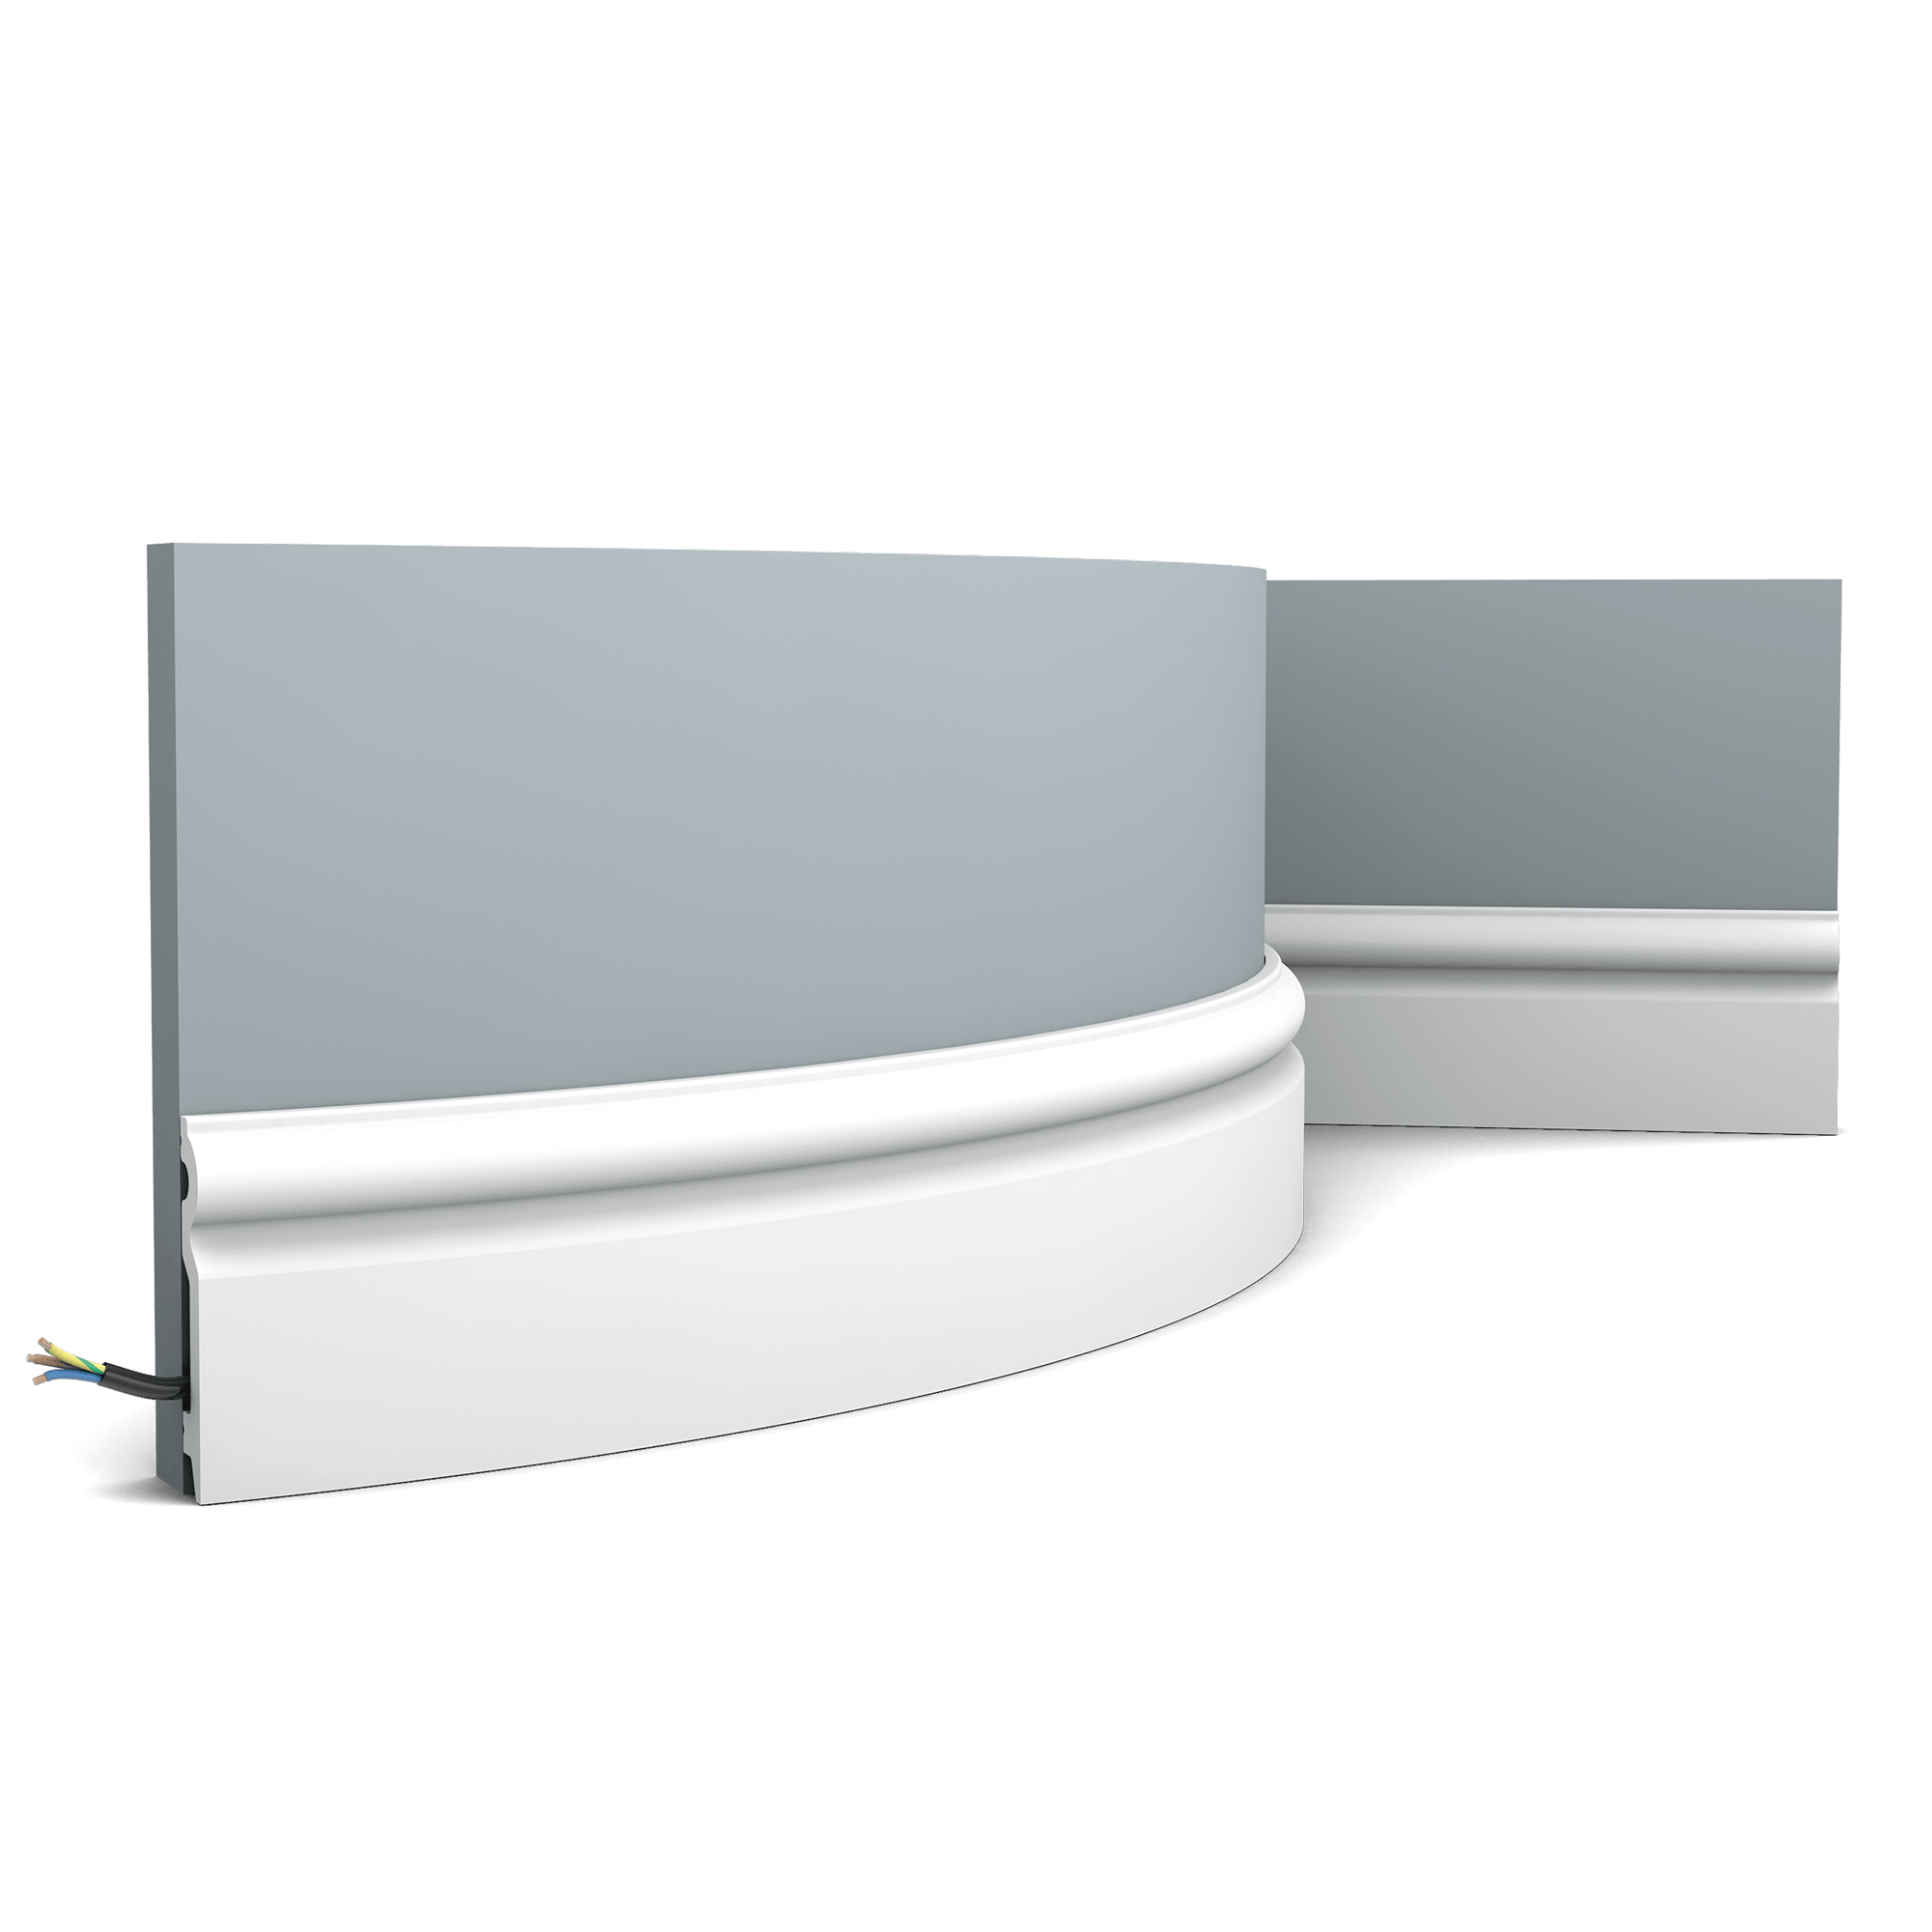 Flexible version of the SX137. This medium-tall, rounded profile provides your wall with an elegant finish. Thanks to its Flex technology, curved walls and surfaces are no problem. Installation remark: It is necessary to screw this profile on the wall. Flex Radius: R min = 40 cm